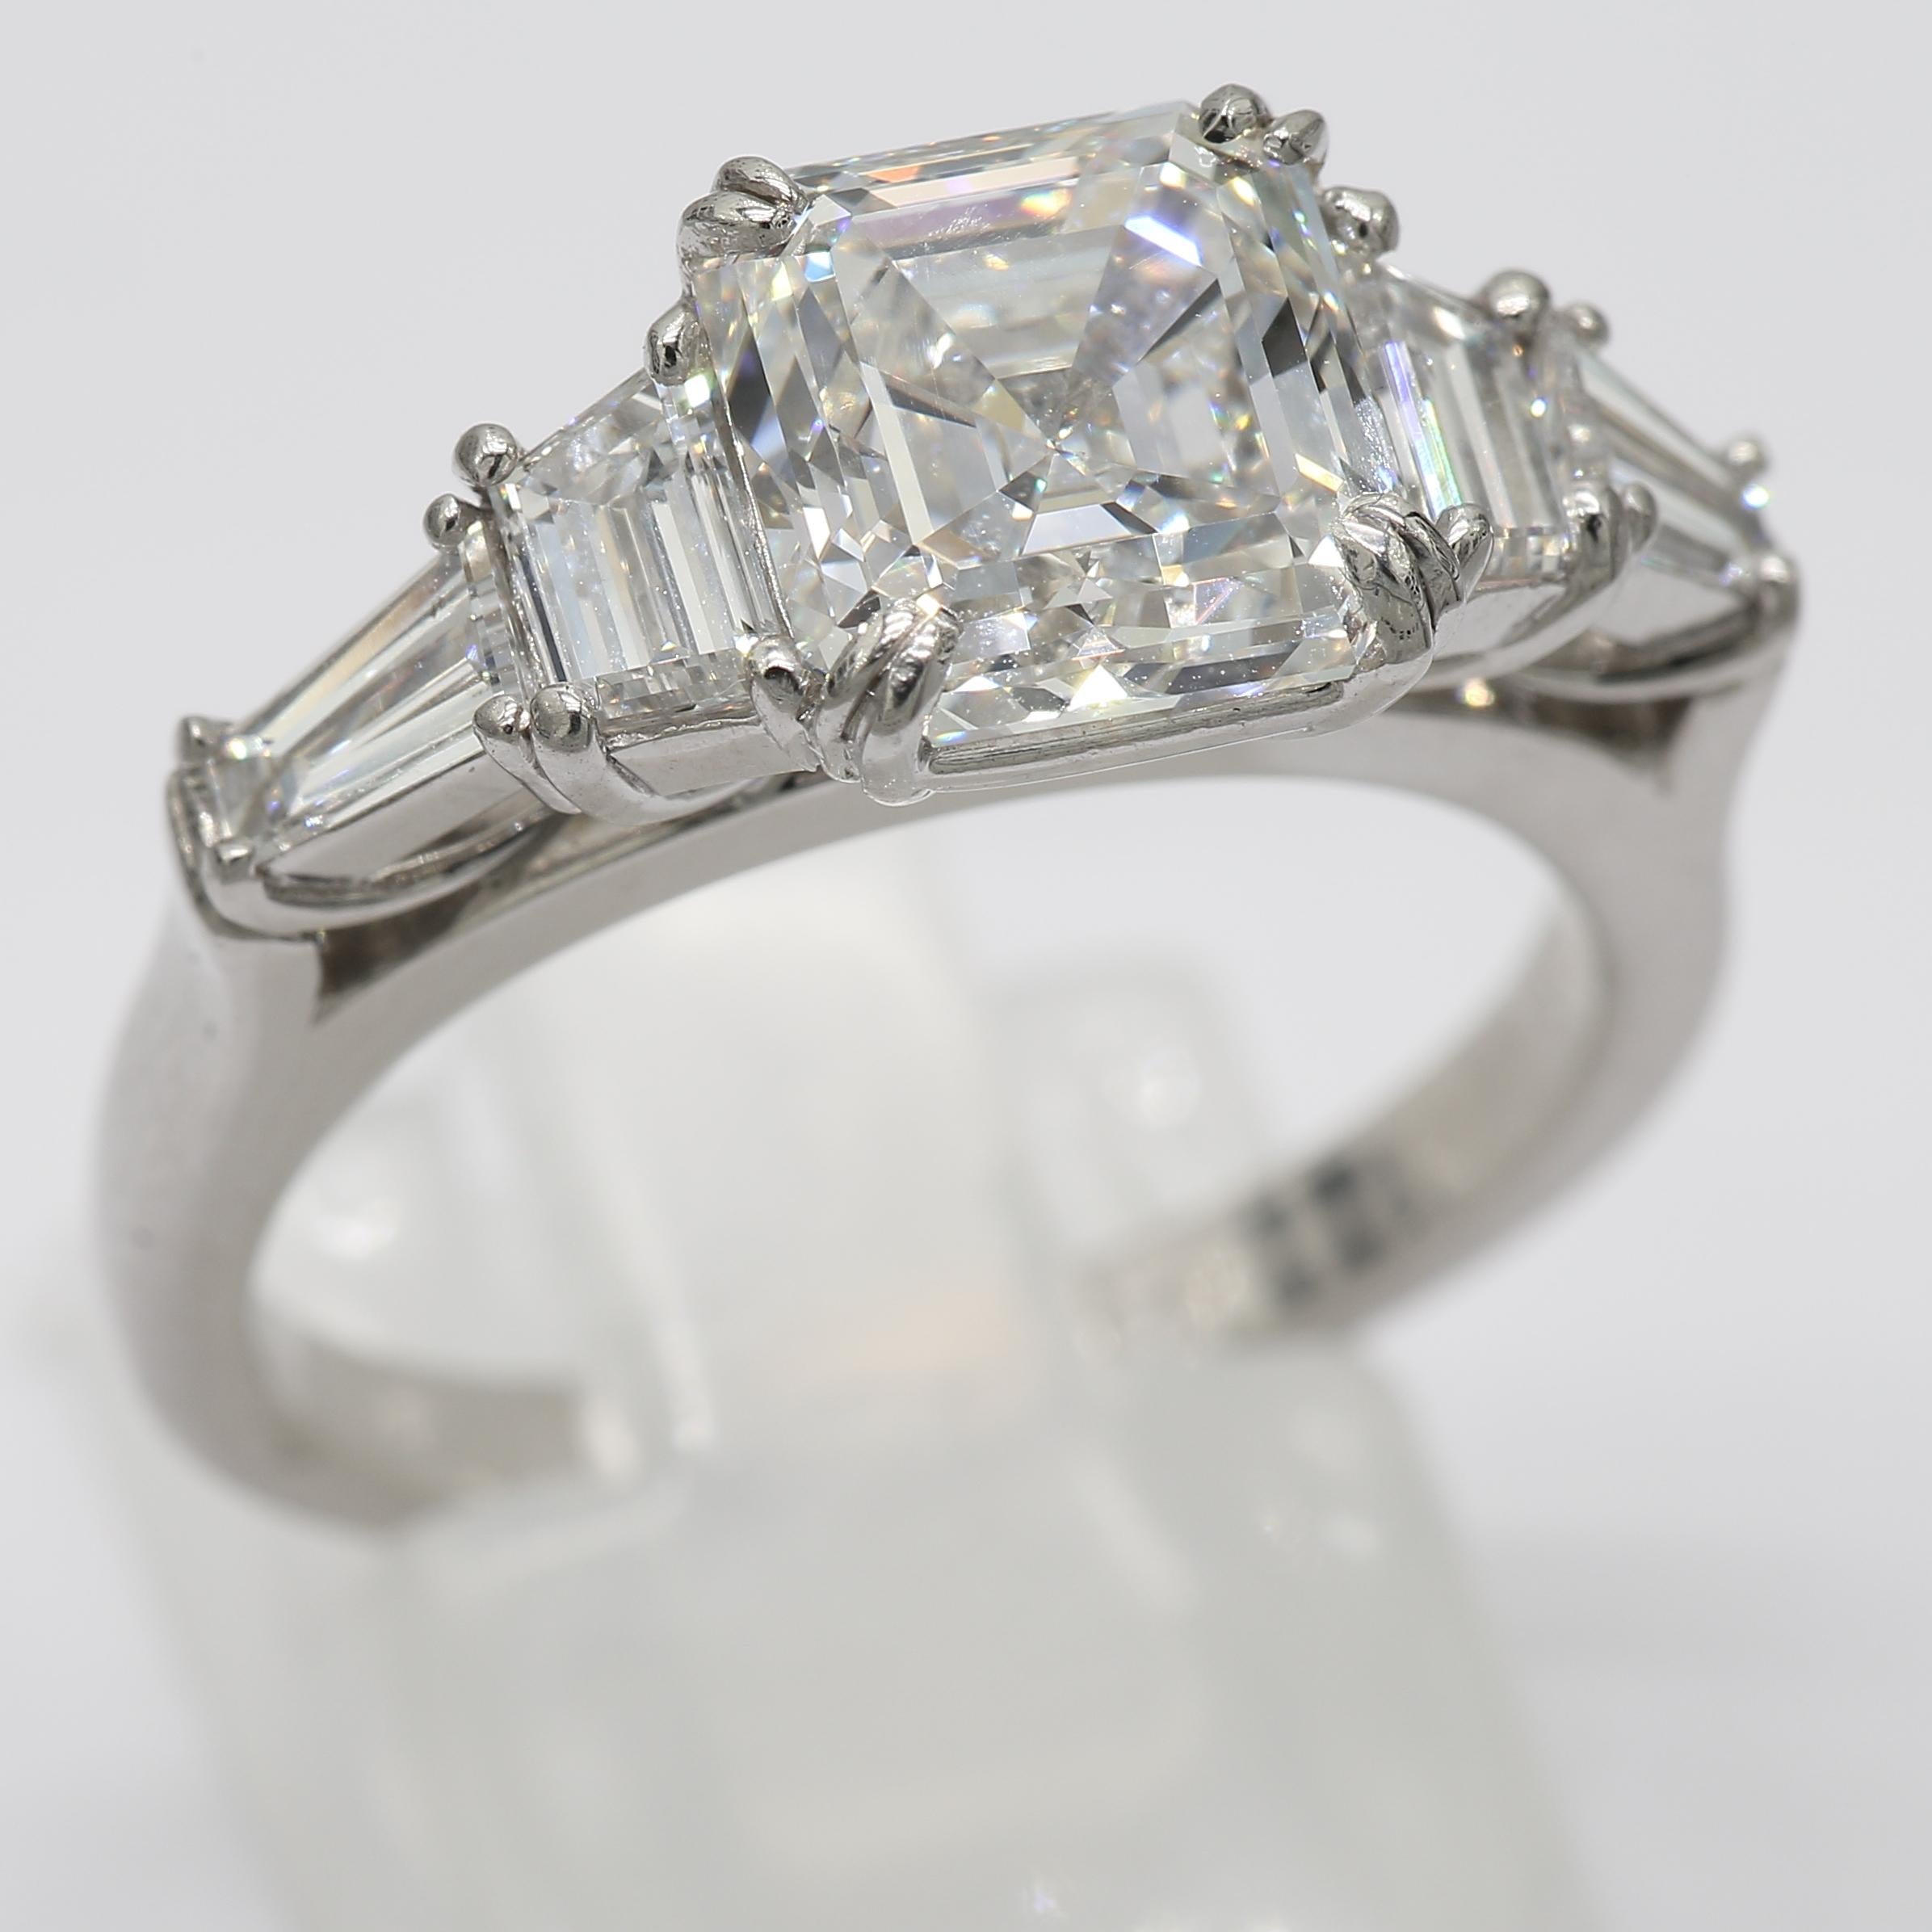 An Asscher Diamond of 3.06 Carat set next to four Baguette/Trapez Cut Diamonds of 1.2 Carat to create an impressive ring in Platinum Metal. The beautiful vintage style bridge gives the ring an elegant touch and holds the diamonds high. Dress to